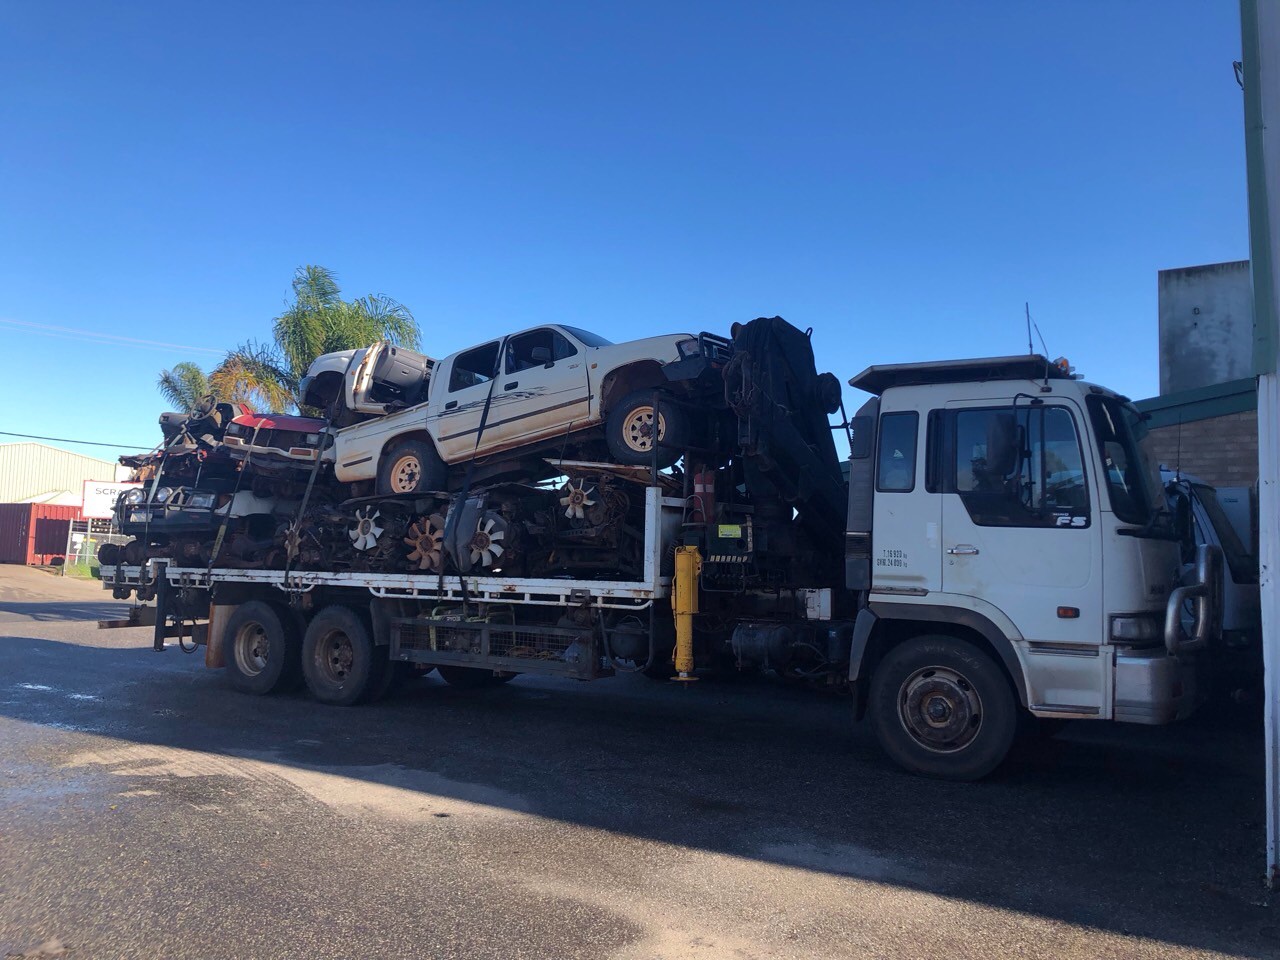 Where to Sell Scrap Cars Brisbane? Let’s discuss a few important Points